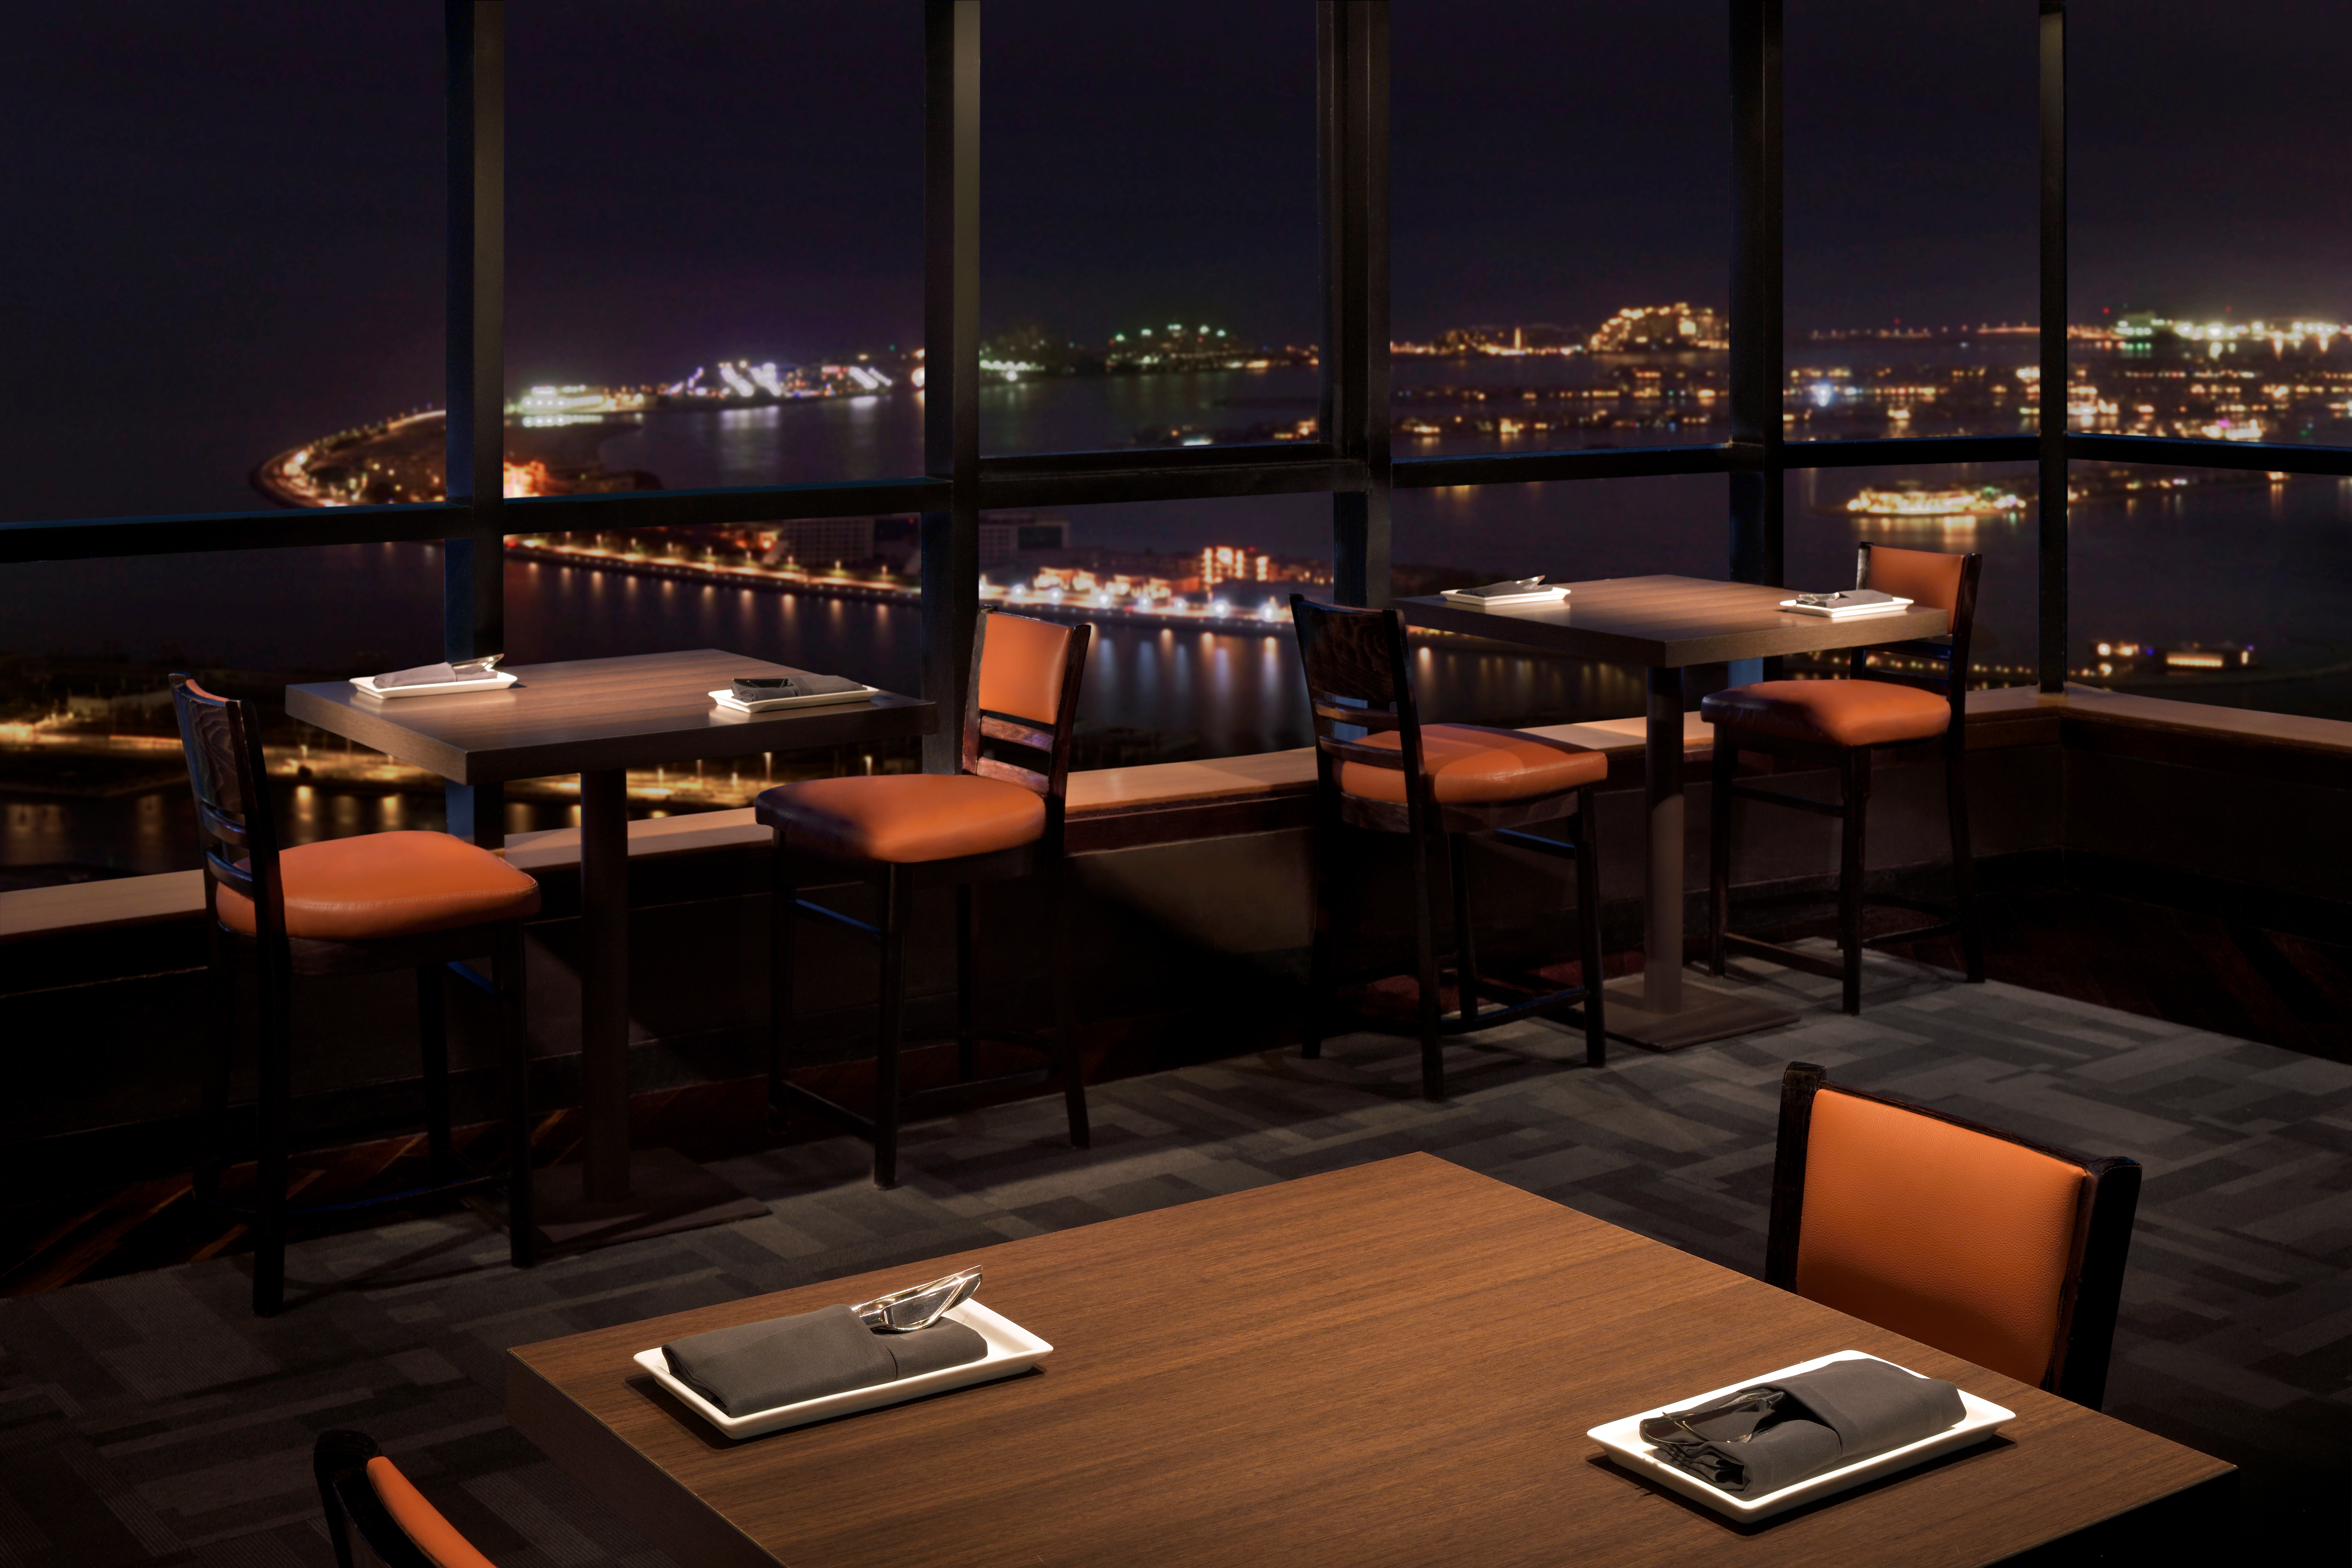 Dining tables with evening city view